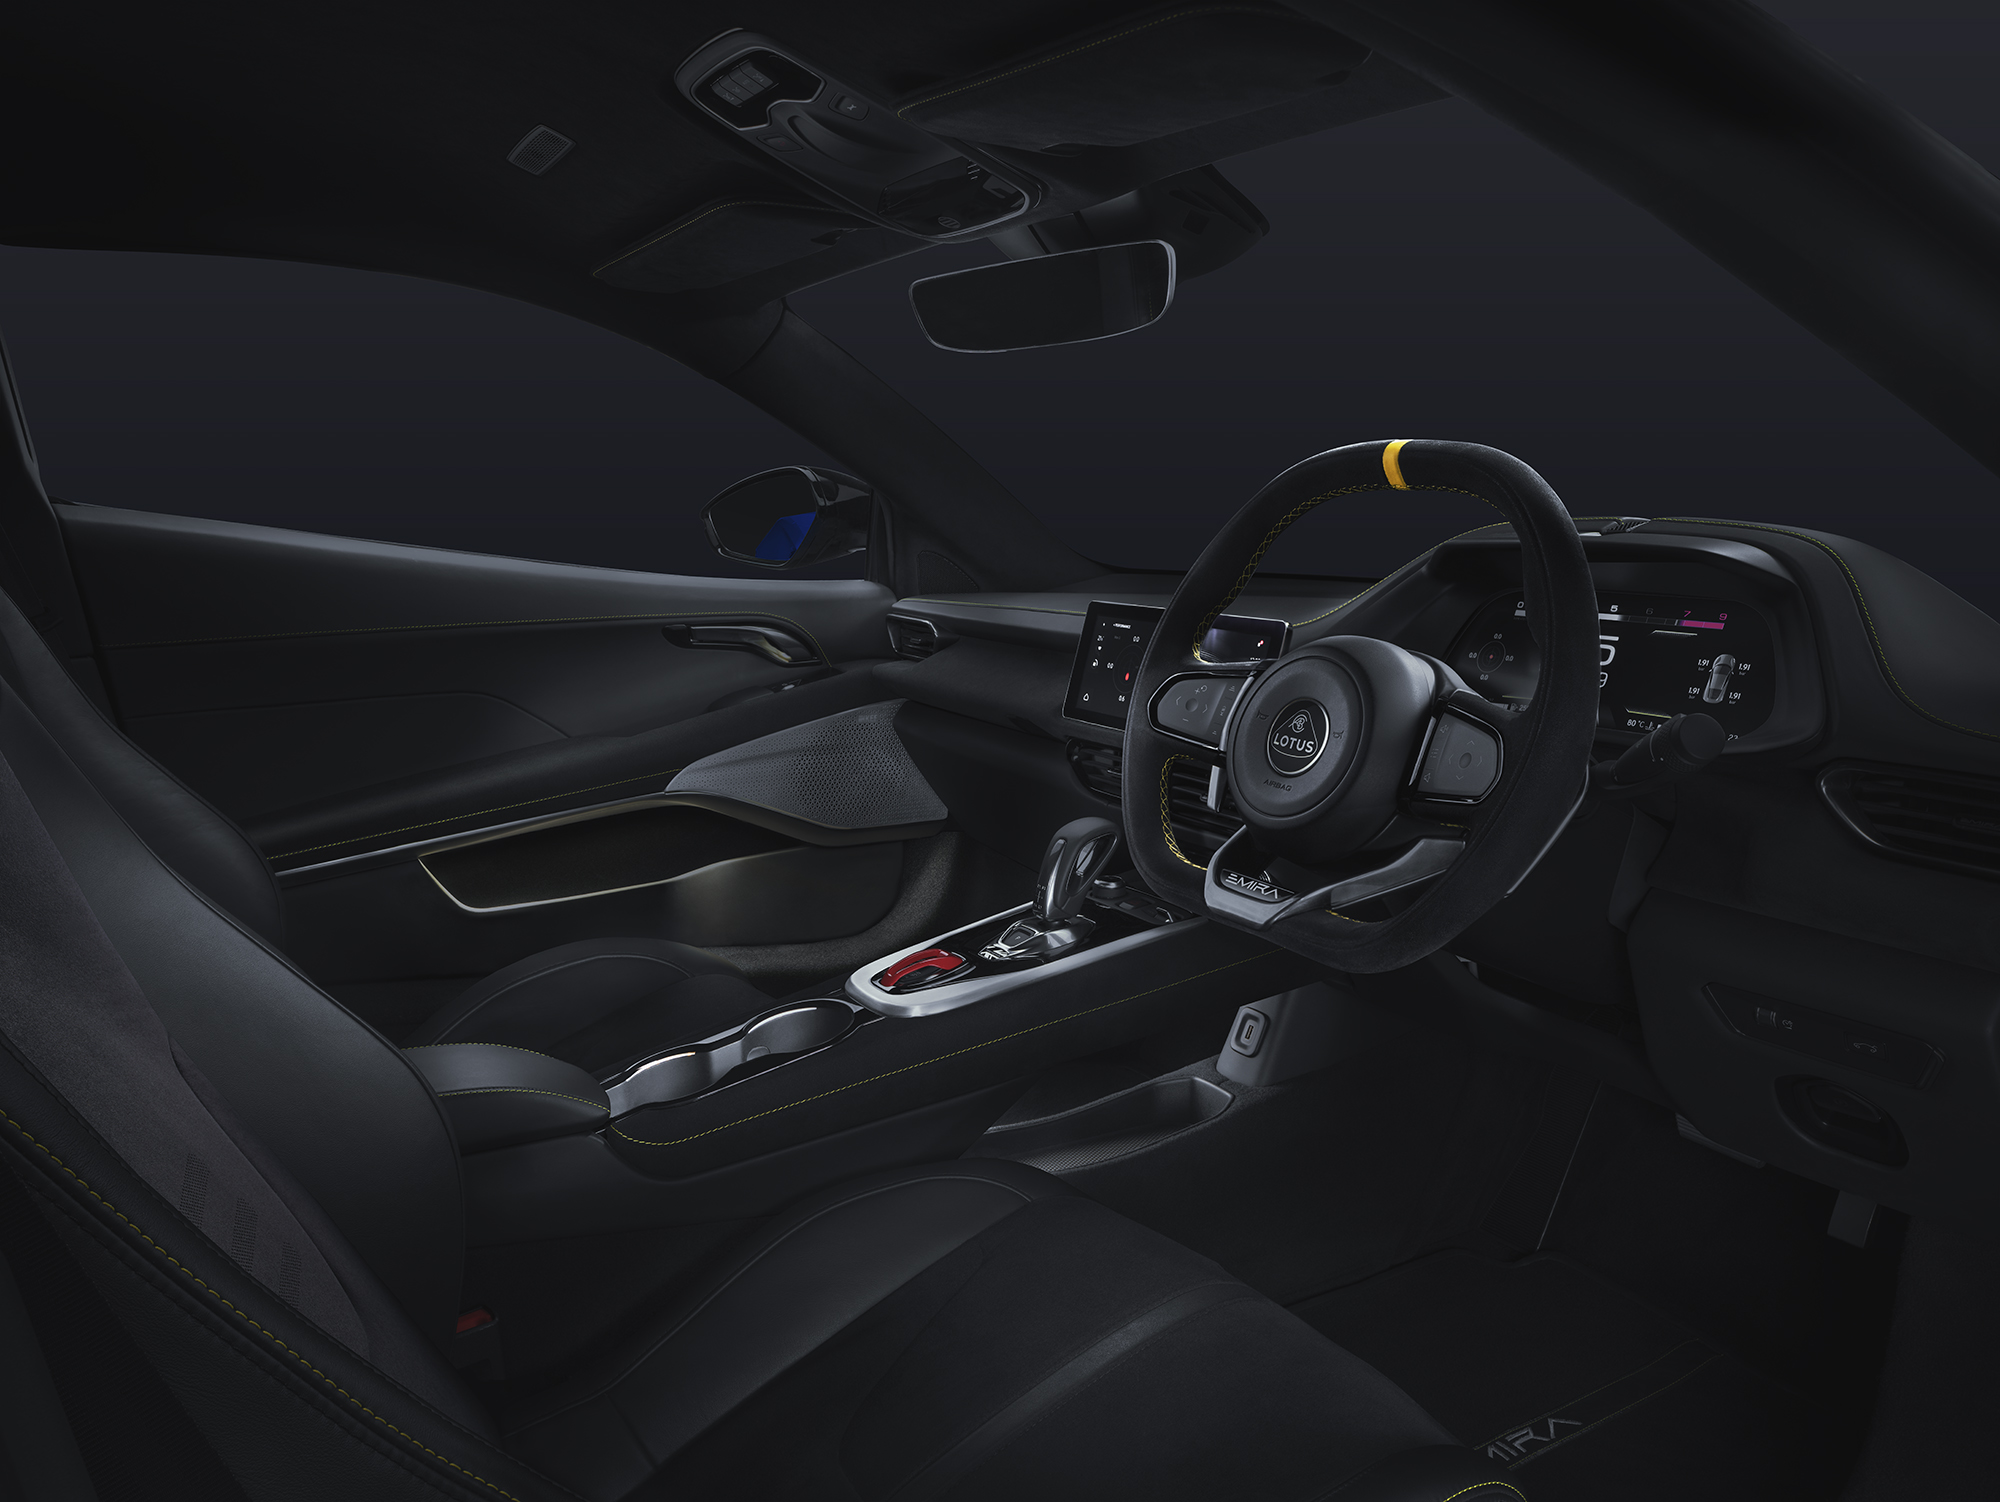 View from the driver's side front window into the Lotus Emira interior. The black and yellow steering wheel, driving display, touchscreen centre console, and metalic controls are all visible. | 0630 Image-1_2000px.jpg